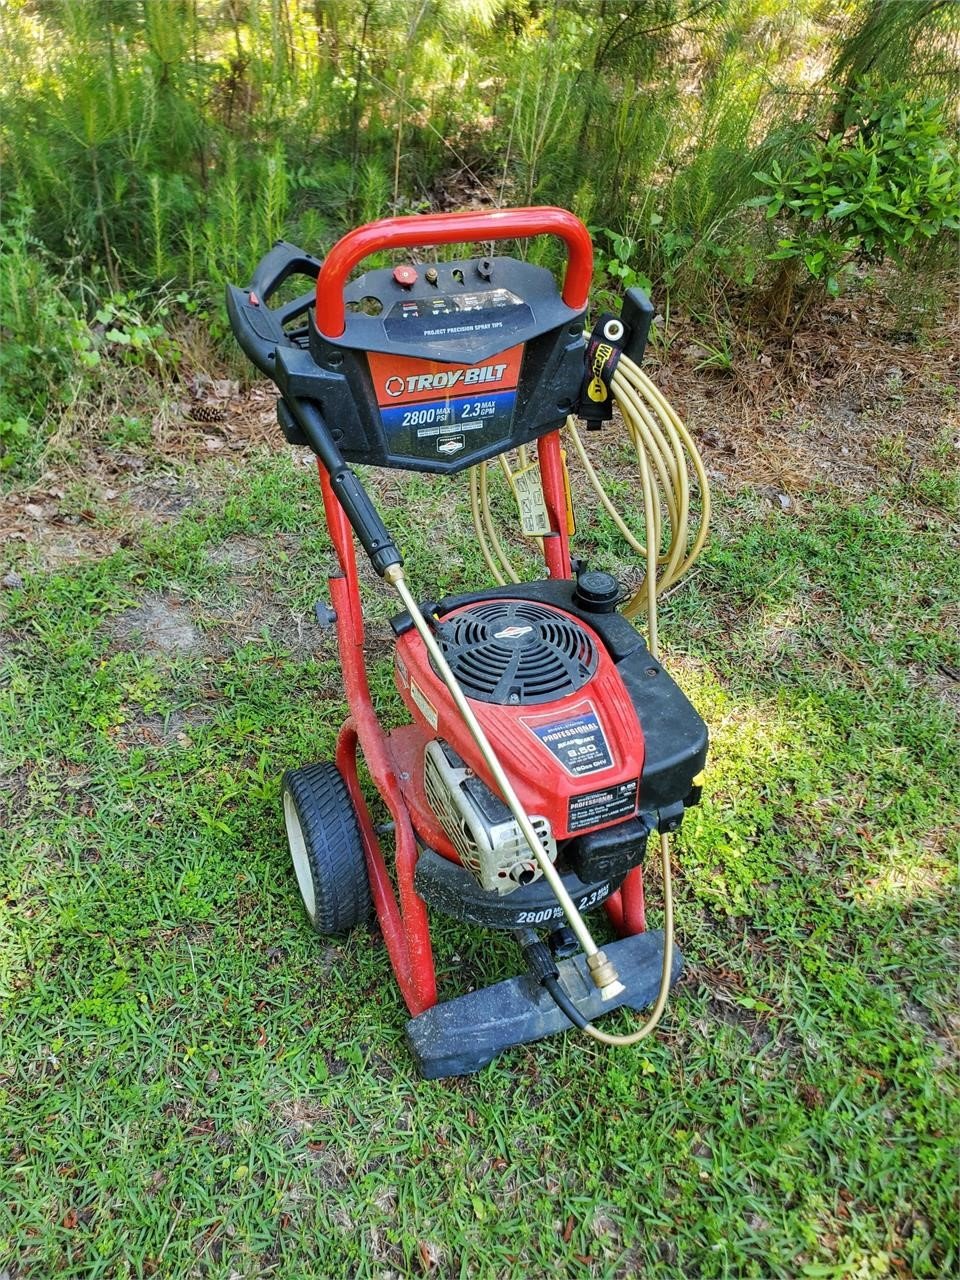 Troy built pressure washer untested